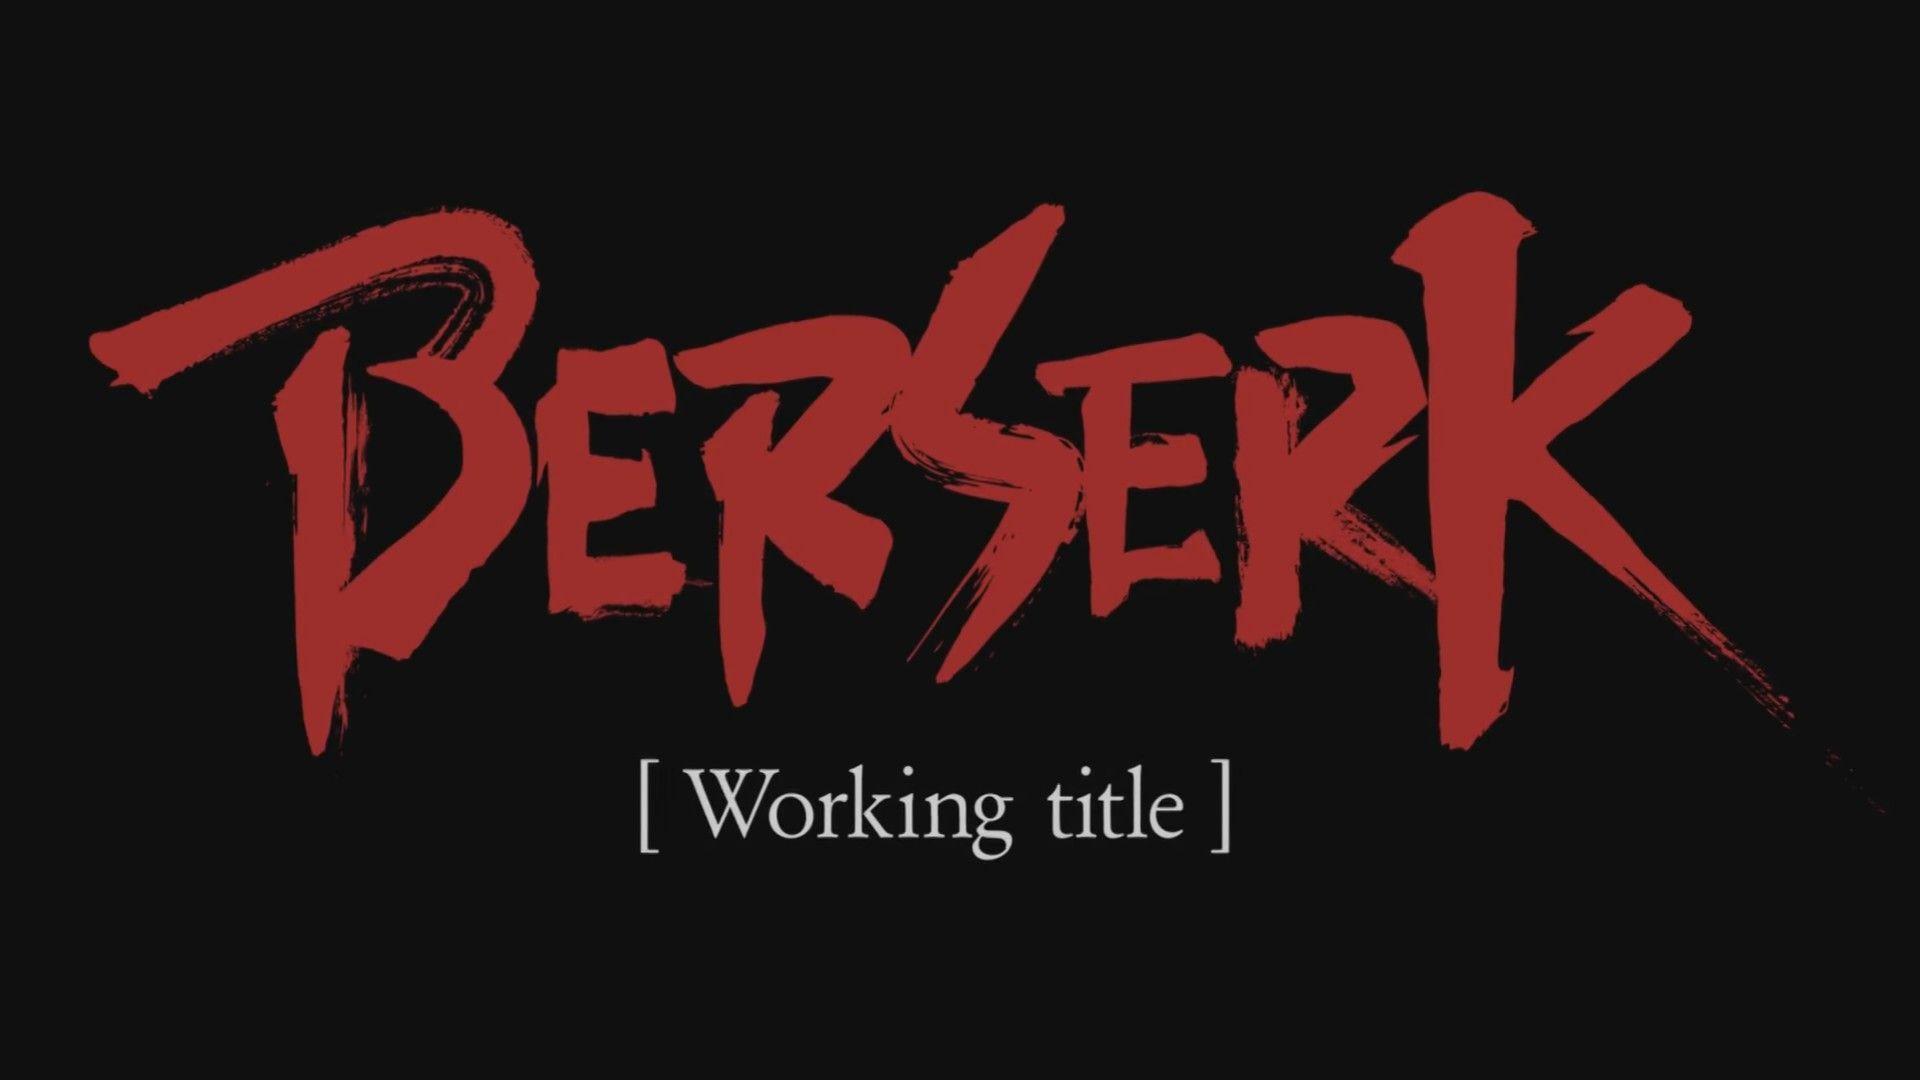 Berserk for PS4, PS3 and PS Vita Gets First Image and Japanese